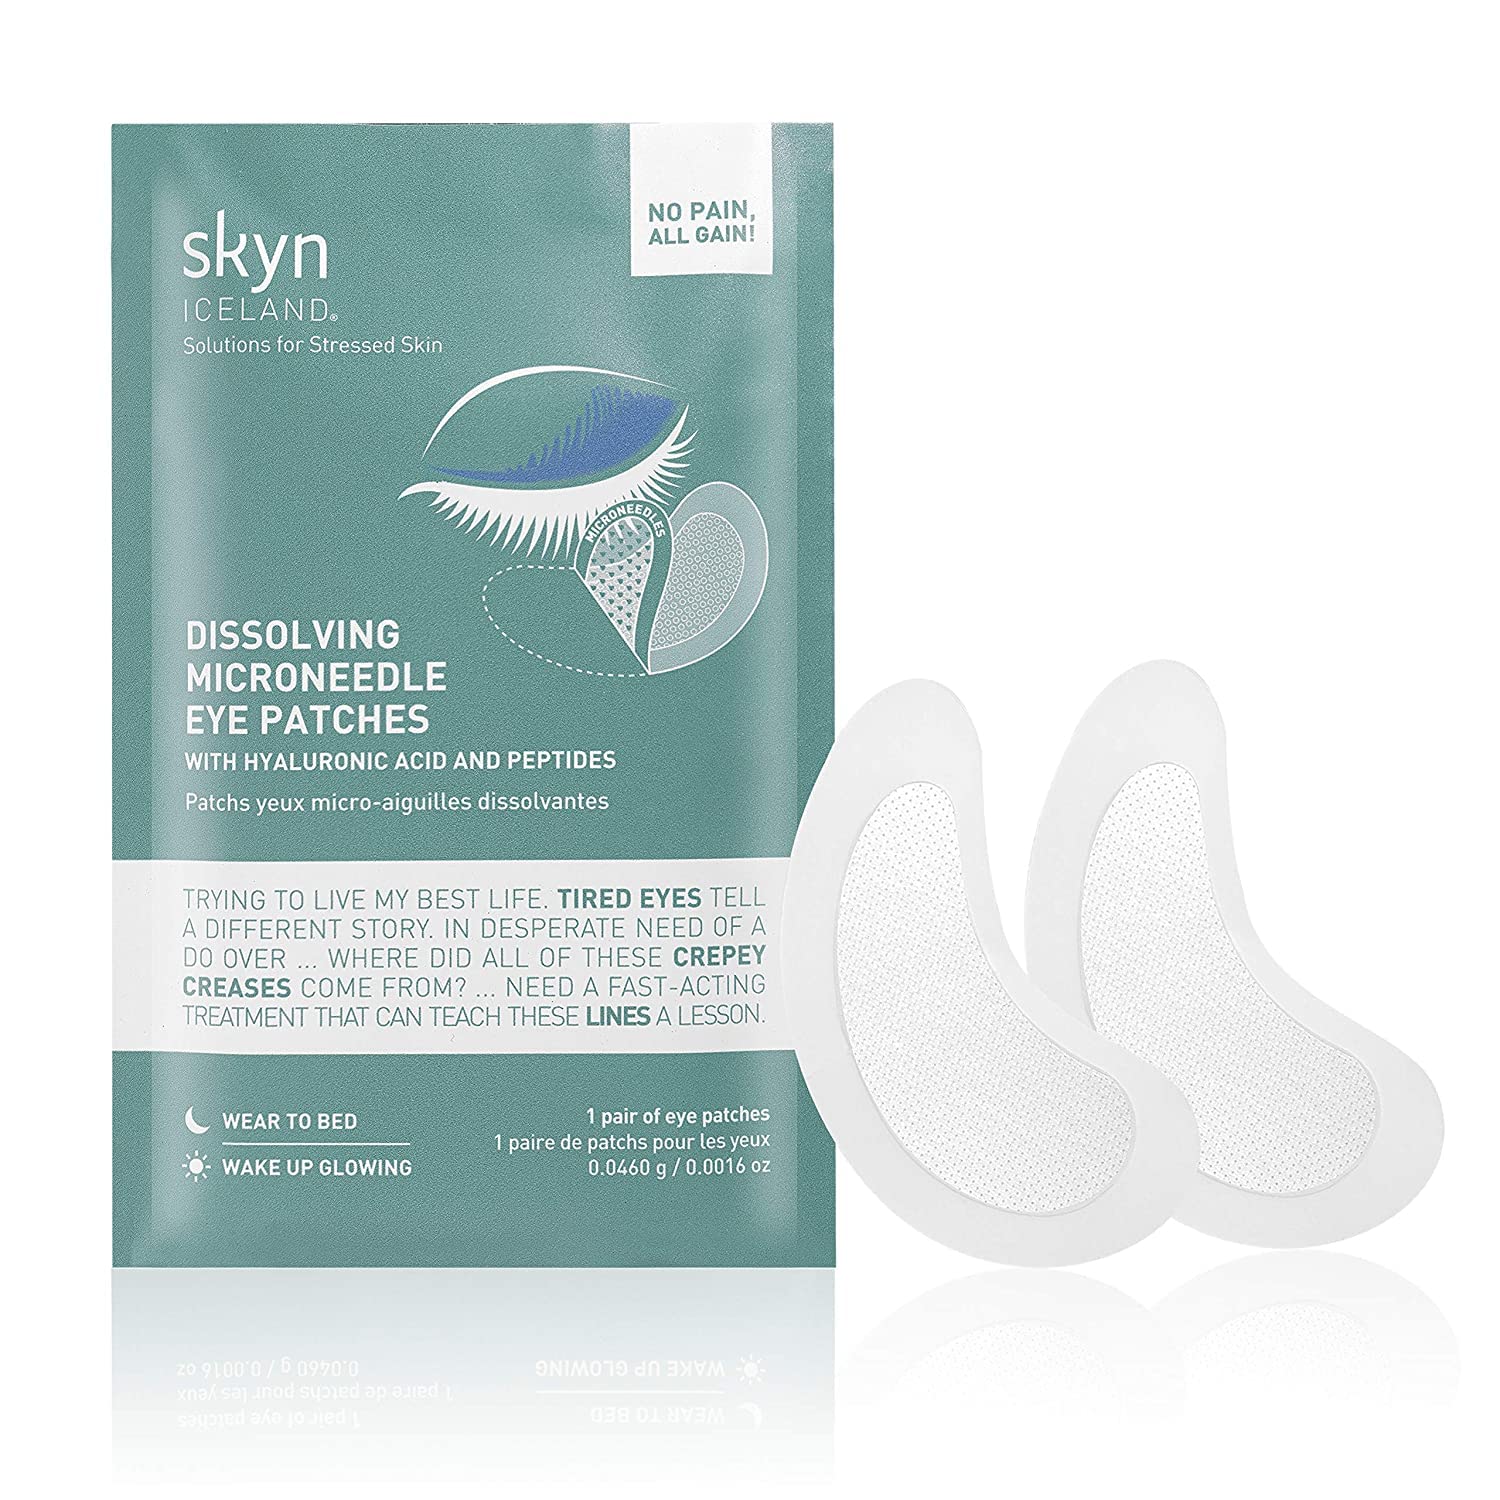 Skyn Iceland Dissolving Microneedle Eye Patches With Hyaluronic Acid and Peptides